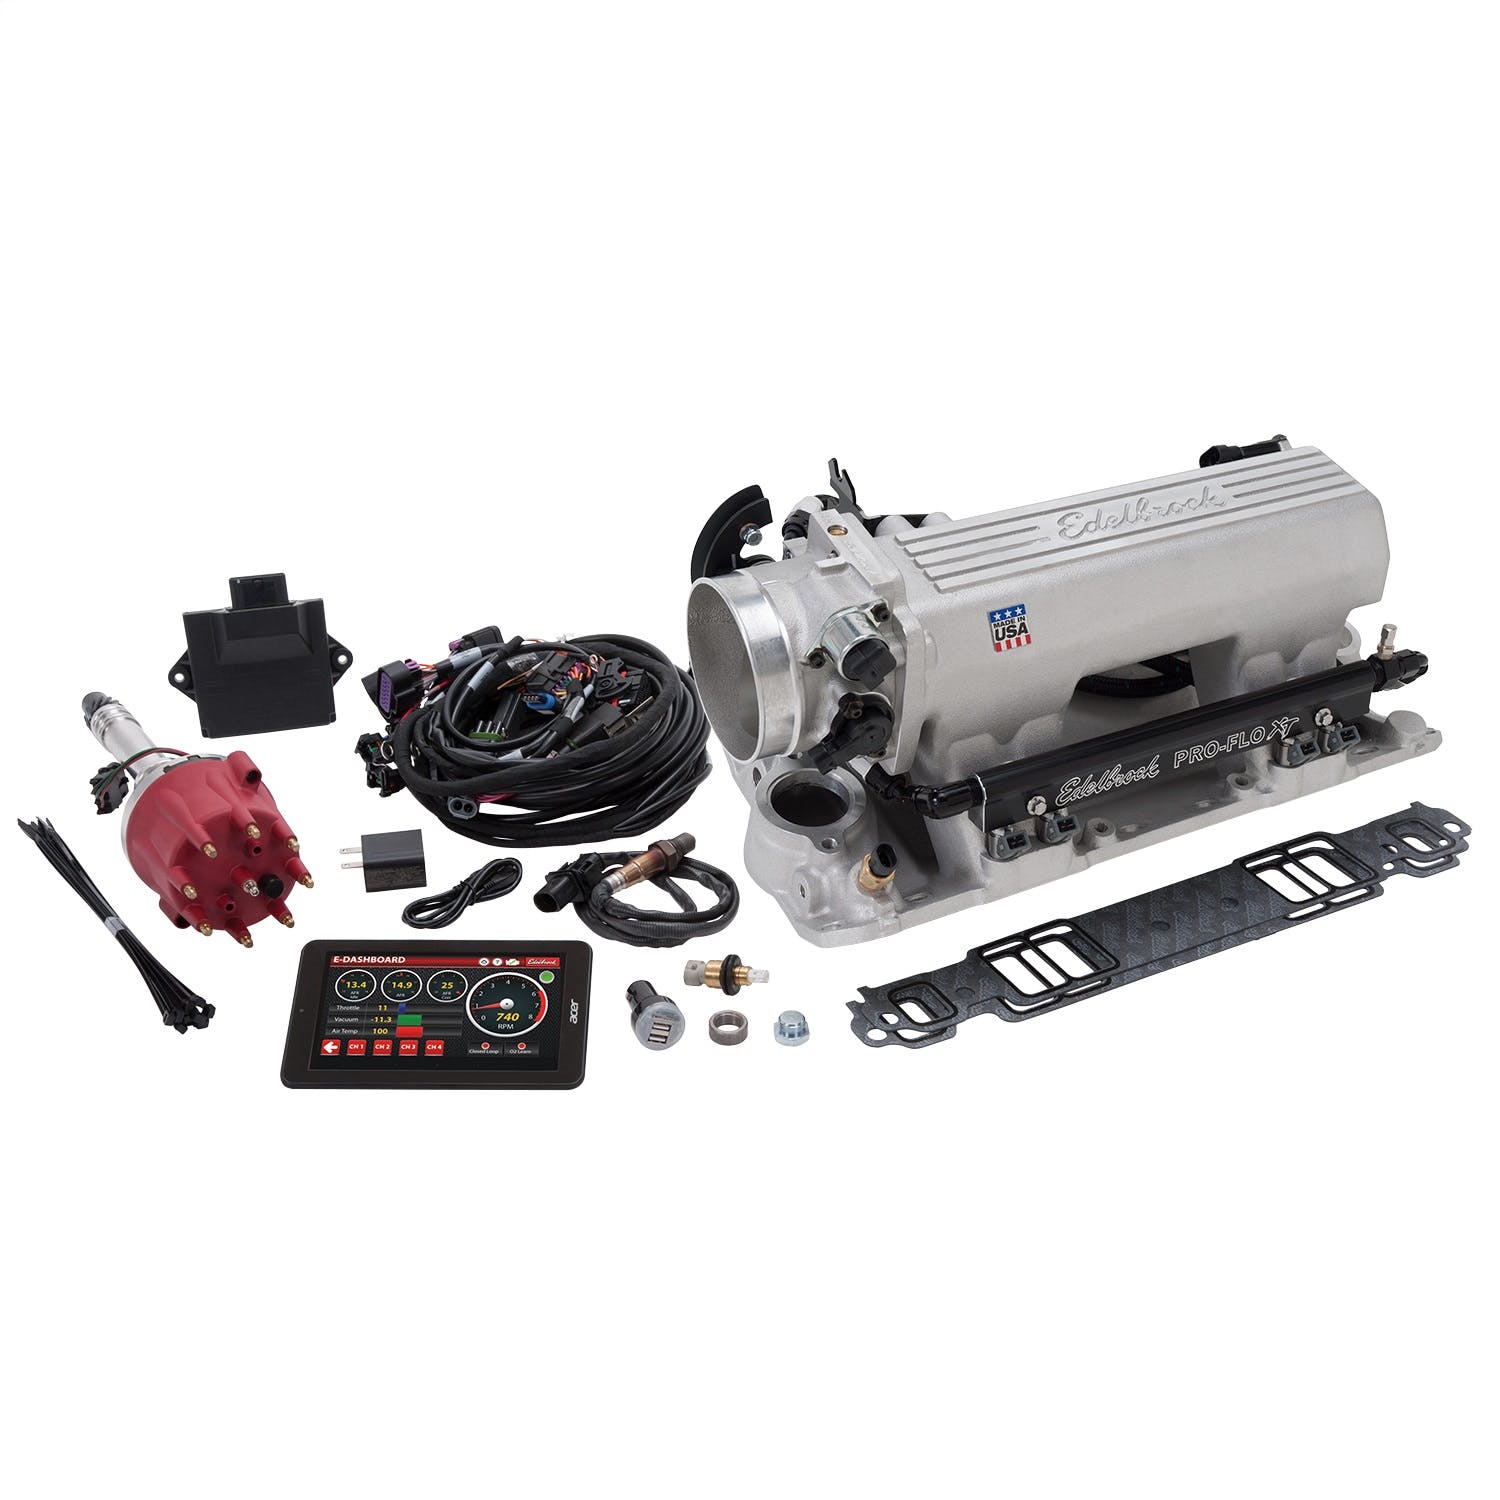 Edelbrock 35810 Pro-Flo 4 XT EFI Kit for 1986 and Earlier Small-Block Chevy Engines